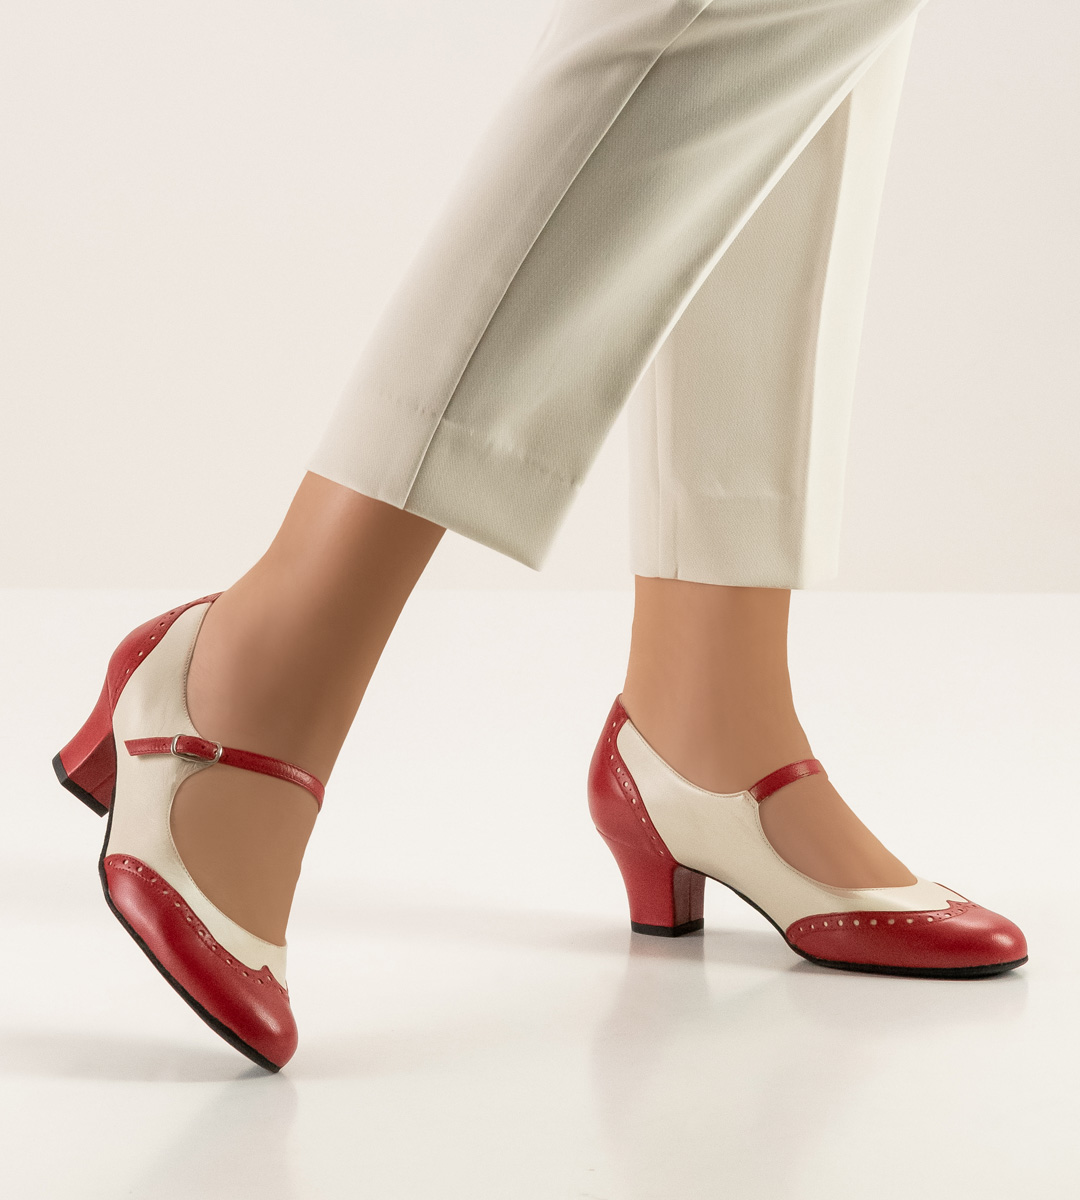 Werner Kern ladies' dance shoe in combination with beige trousers